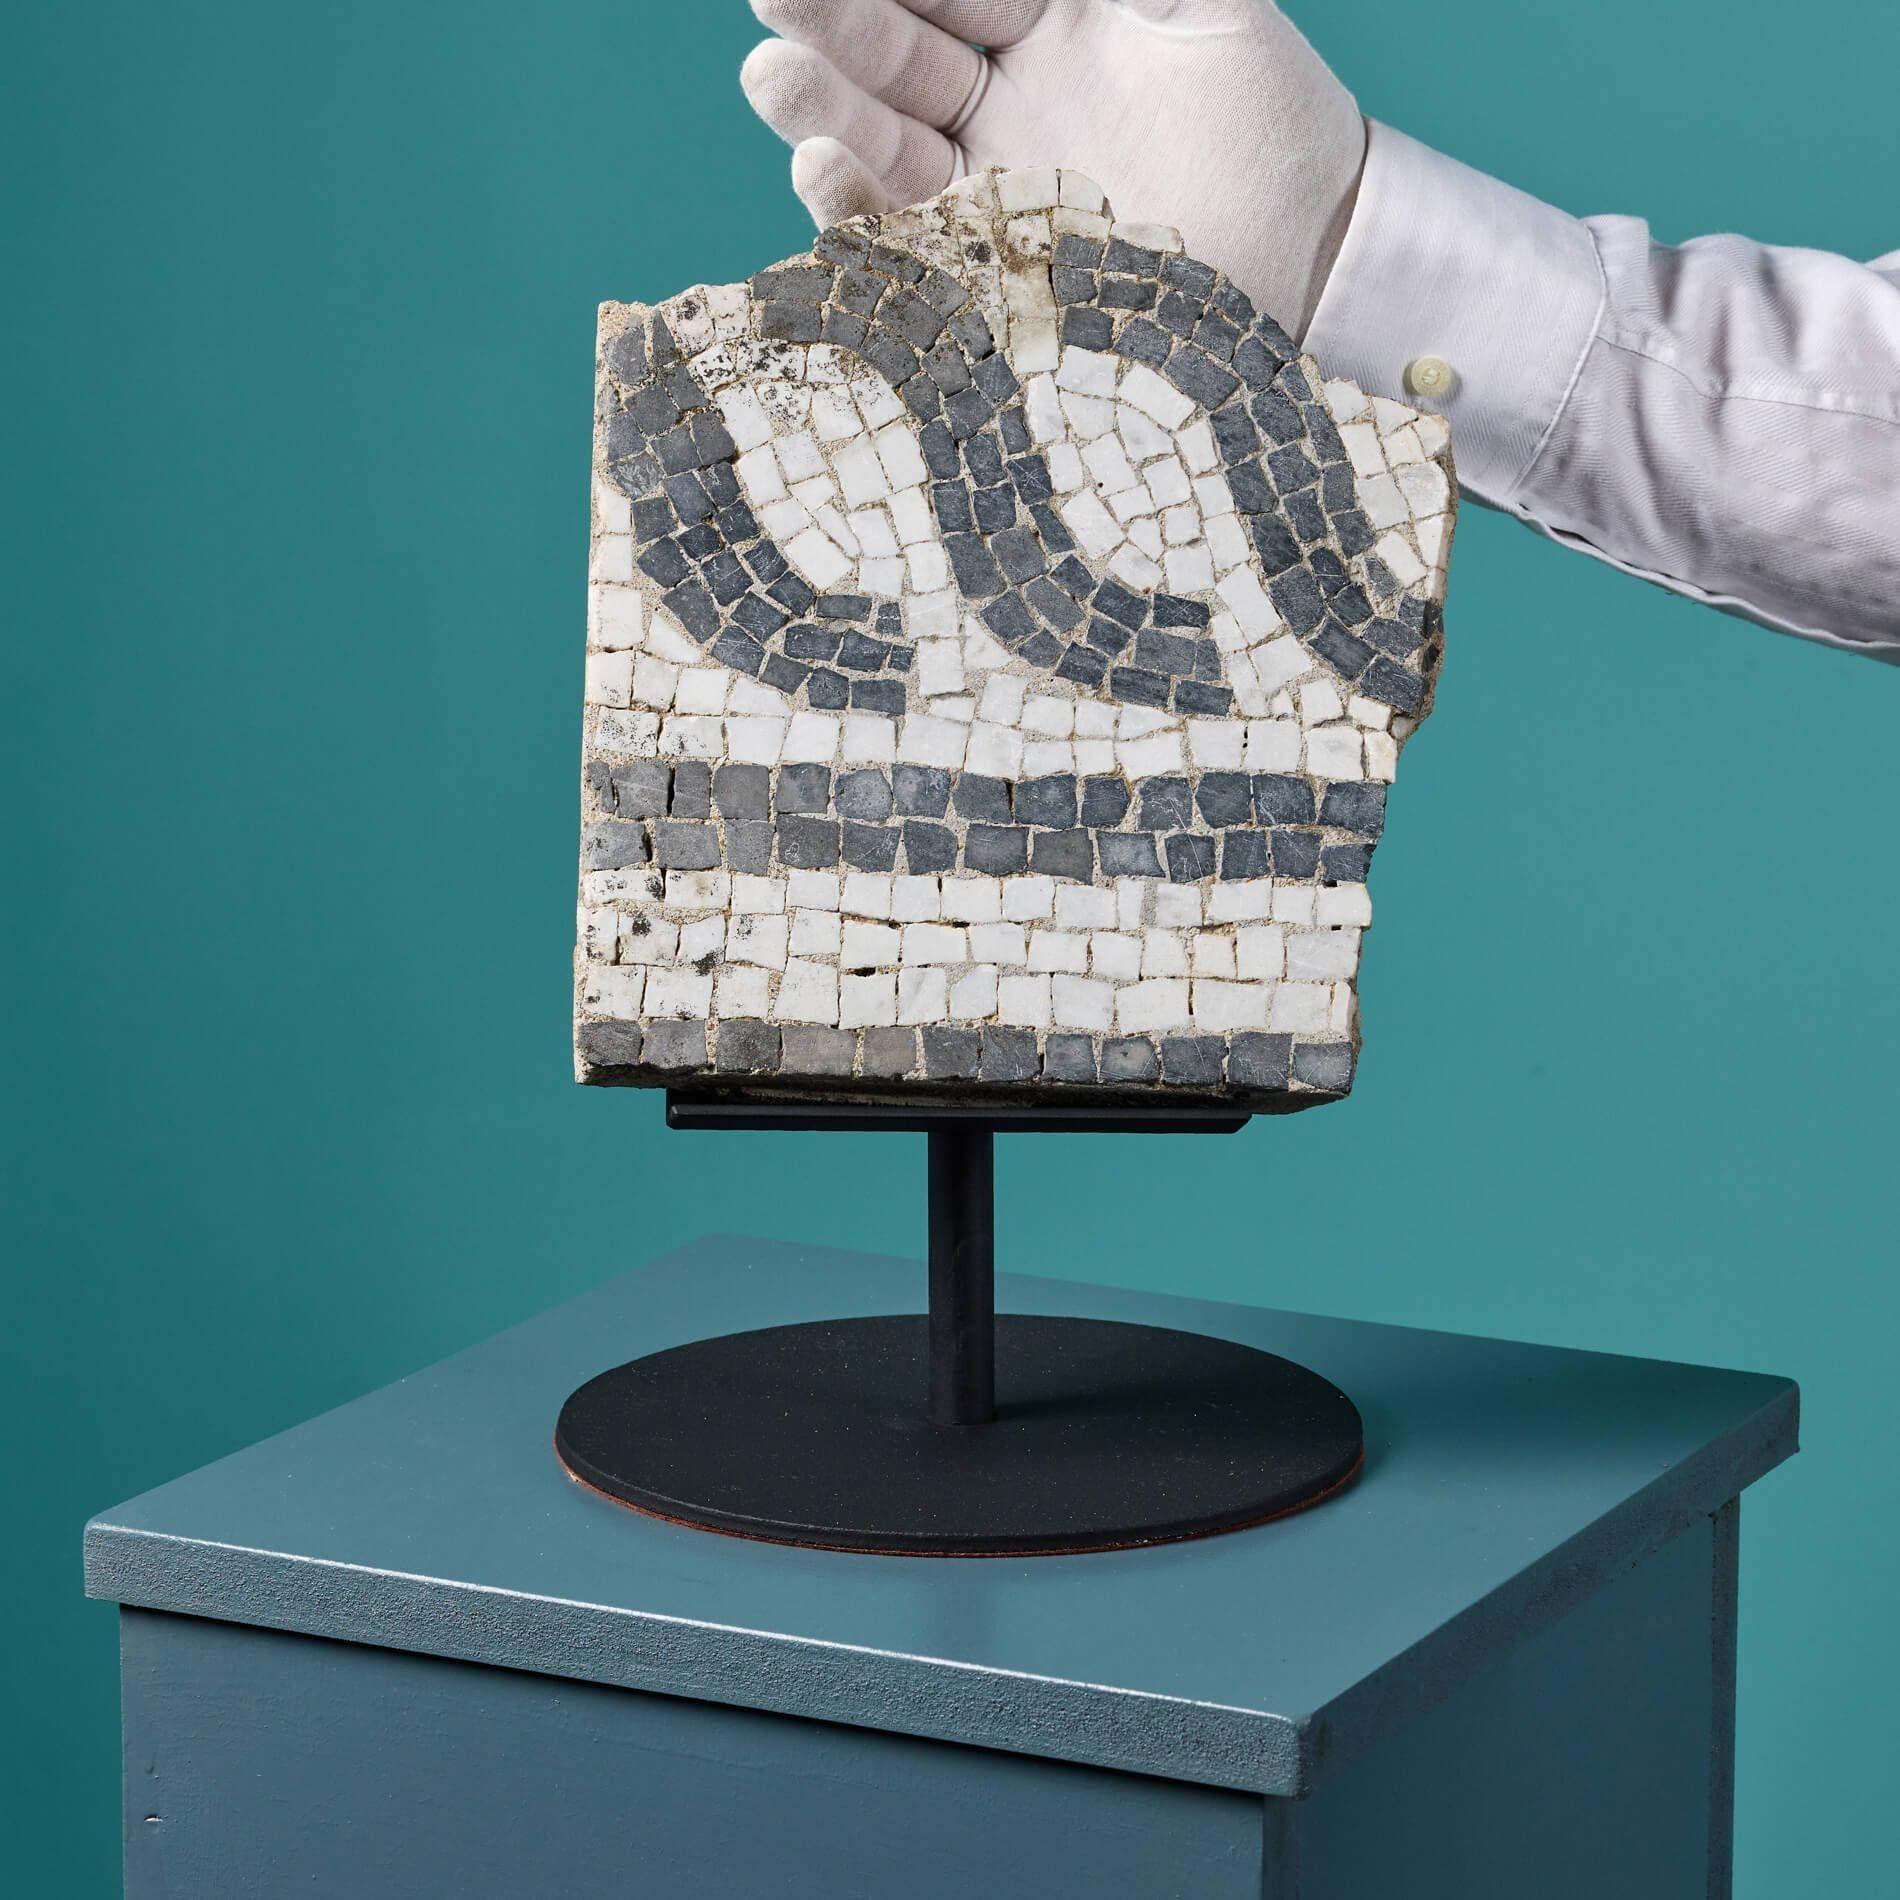 This reclaimed roman style mosaic on stand is a fragment from history. It contains intricate mosaic work using contrasting coloured marble, giving it the look of an ancient Roman villa or bath house. Suggestive of a larger design, it was reclaimed